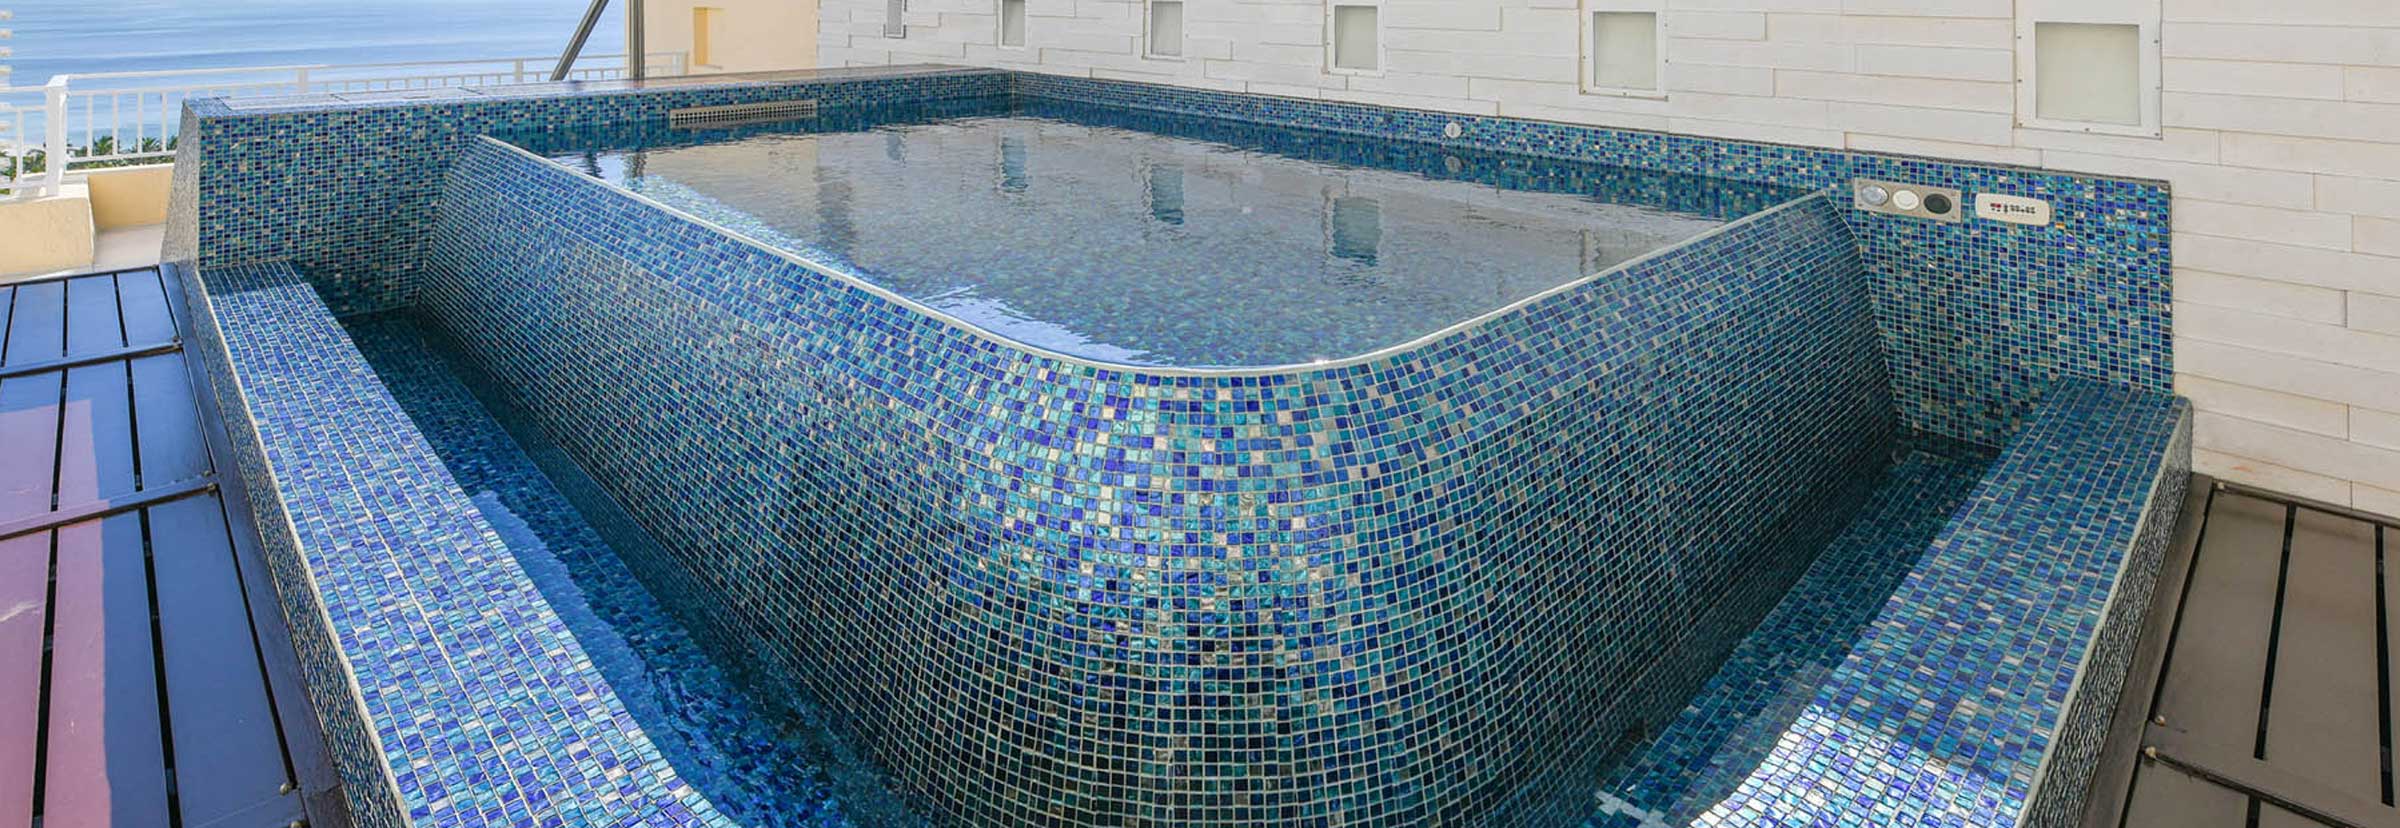 http://Blue%20full%20tile%20swim%20spa%20with%20curved%20edges%20and%20water%20fall